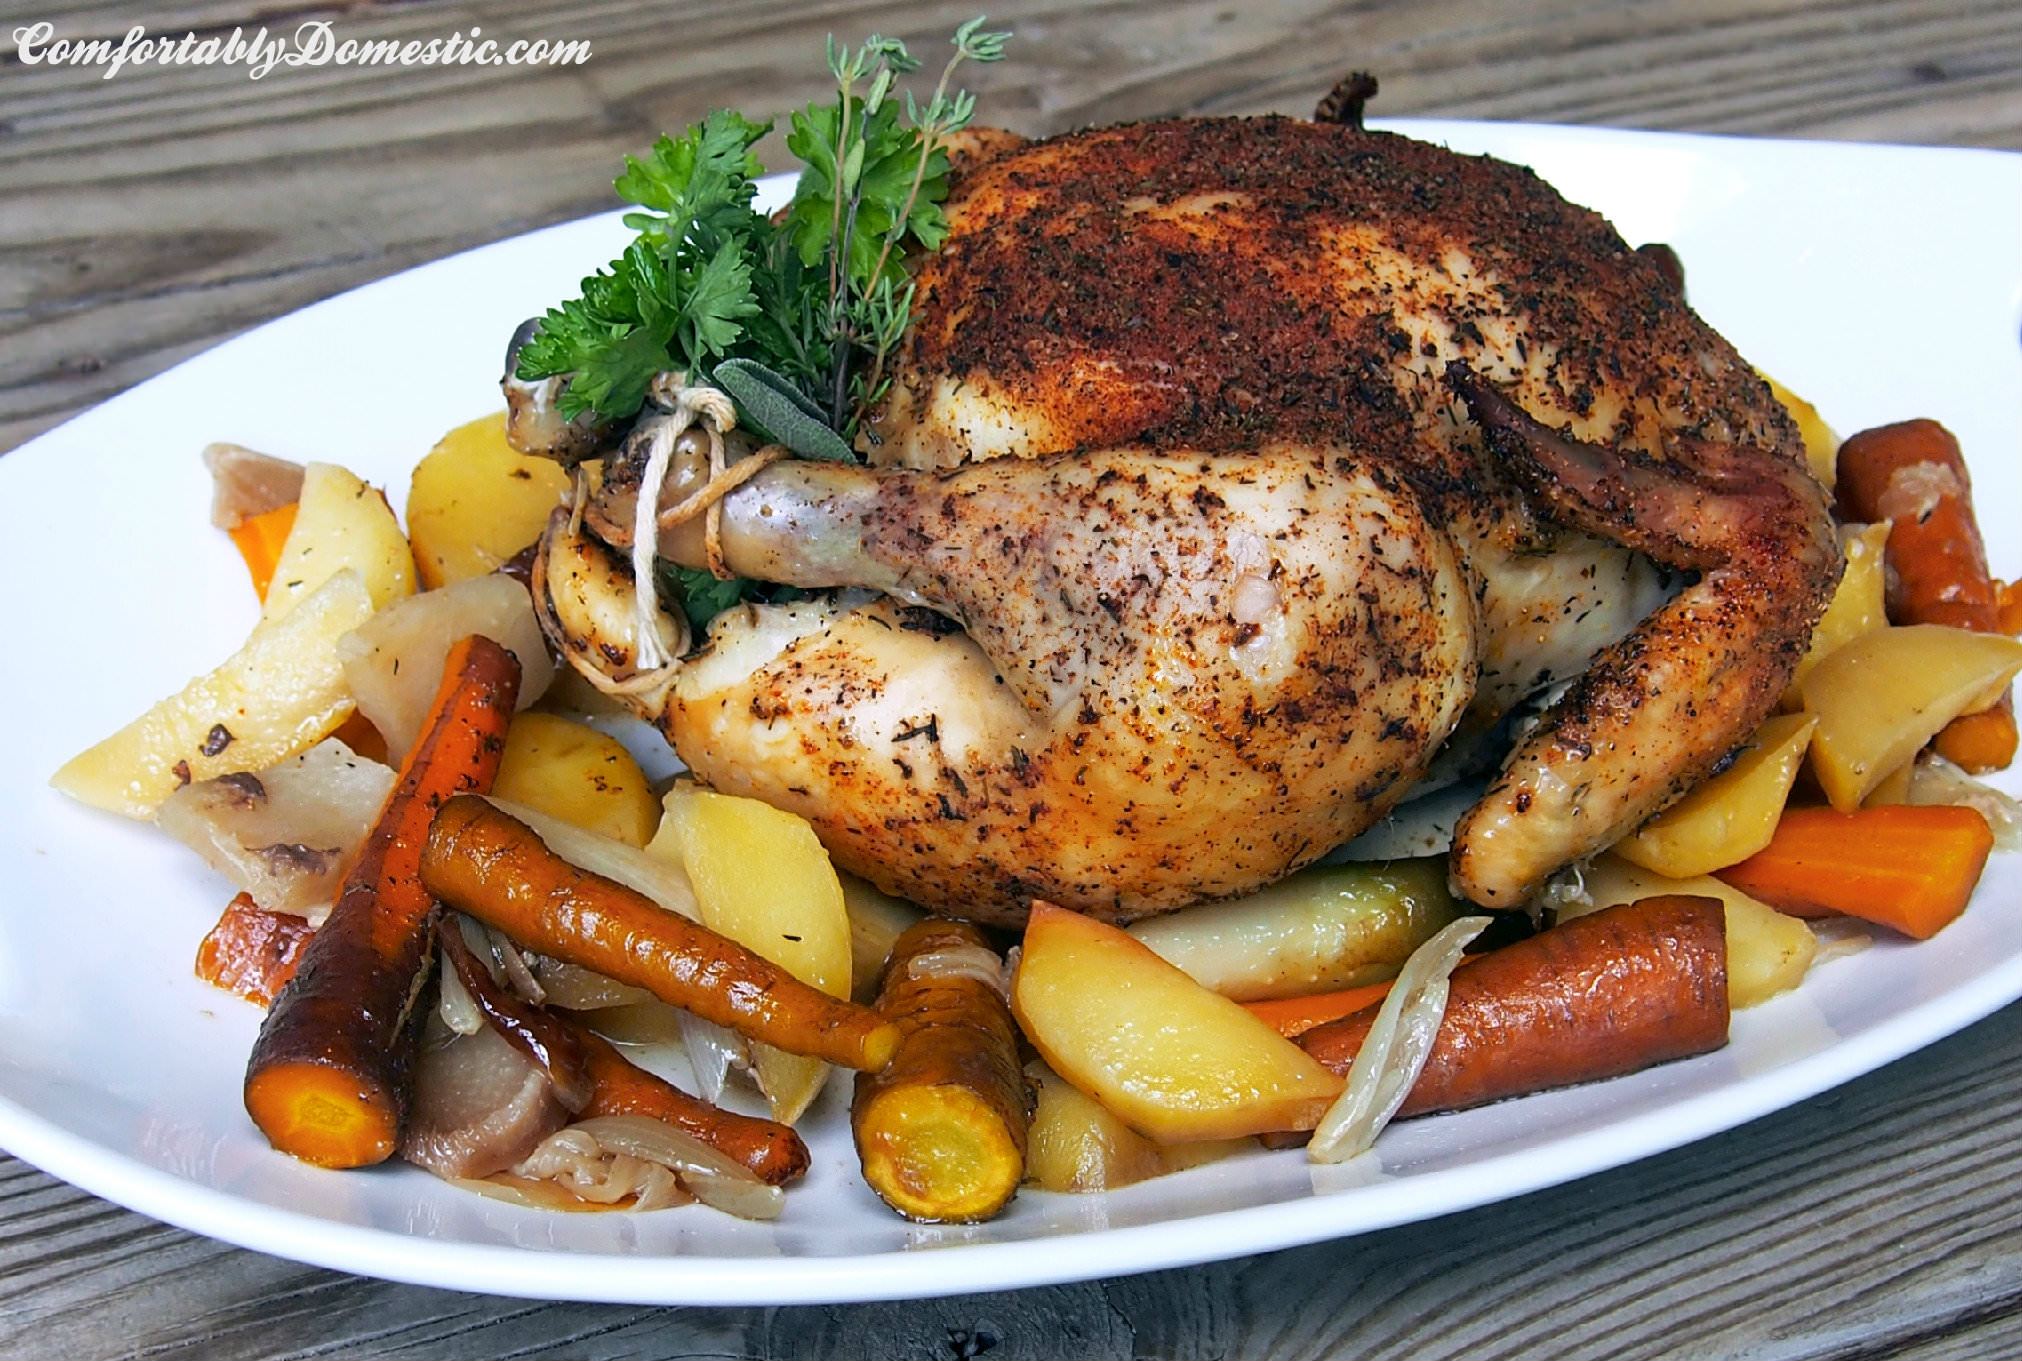 Slow cooker whole roasted chicken is the perfect dinner! Succulent, seasoned chicken on a bed of root vegetables, slow roasted all day for a flavorful and fragrant weeknight meal. | ComfortablyDomestic.com